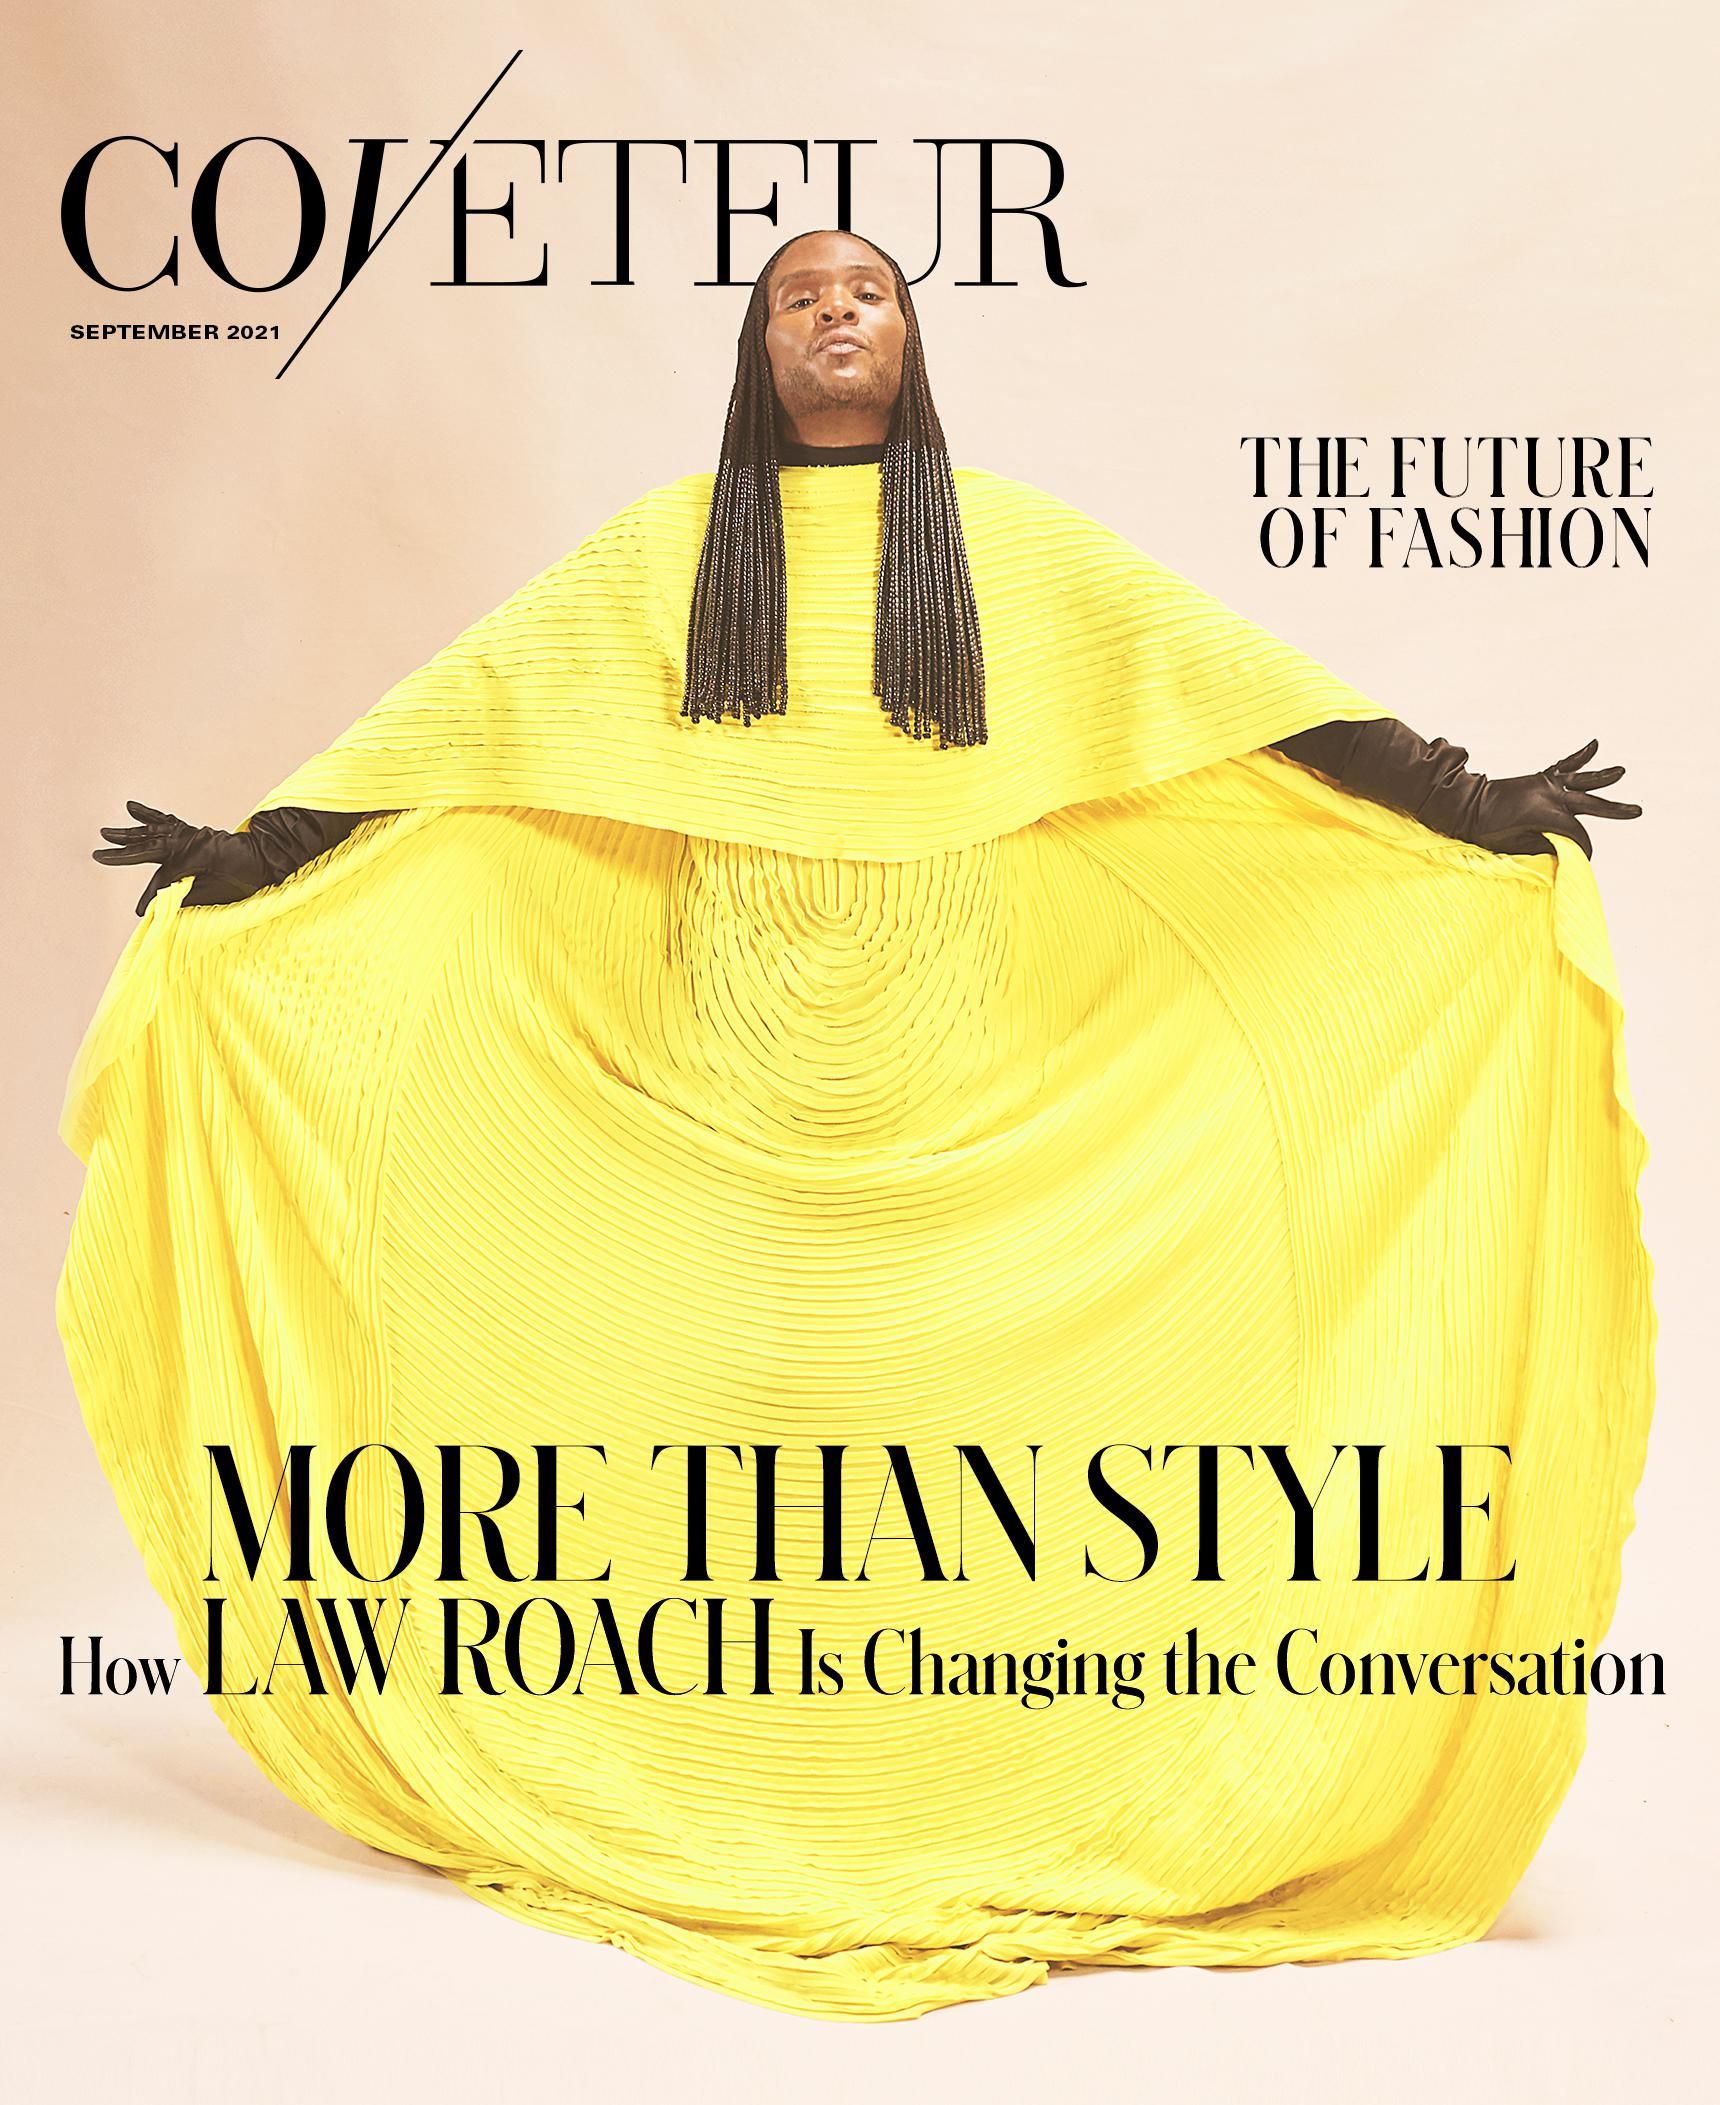 Read our cover story on iconic stylist Law Roach